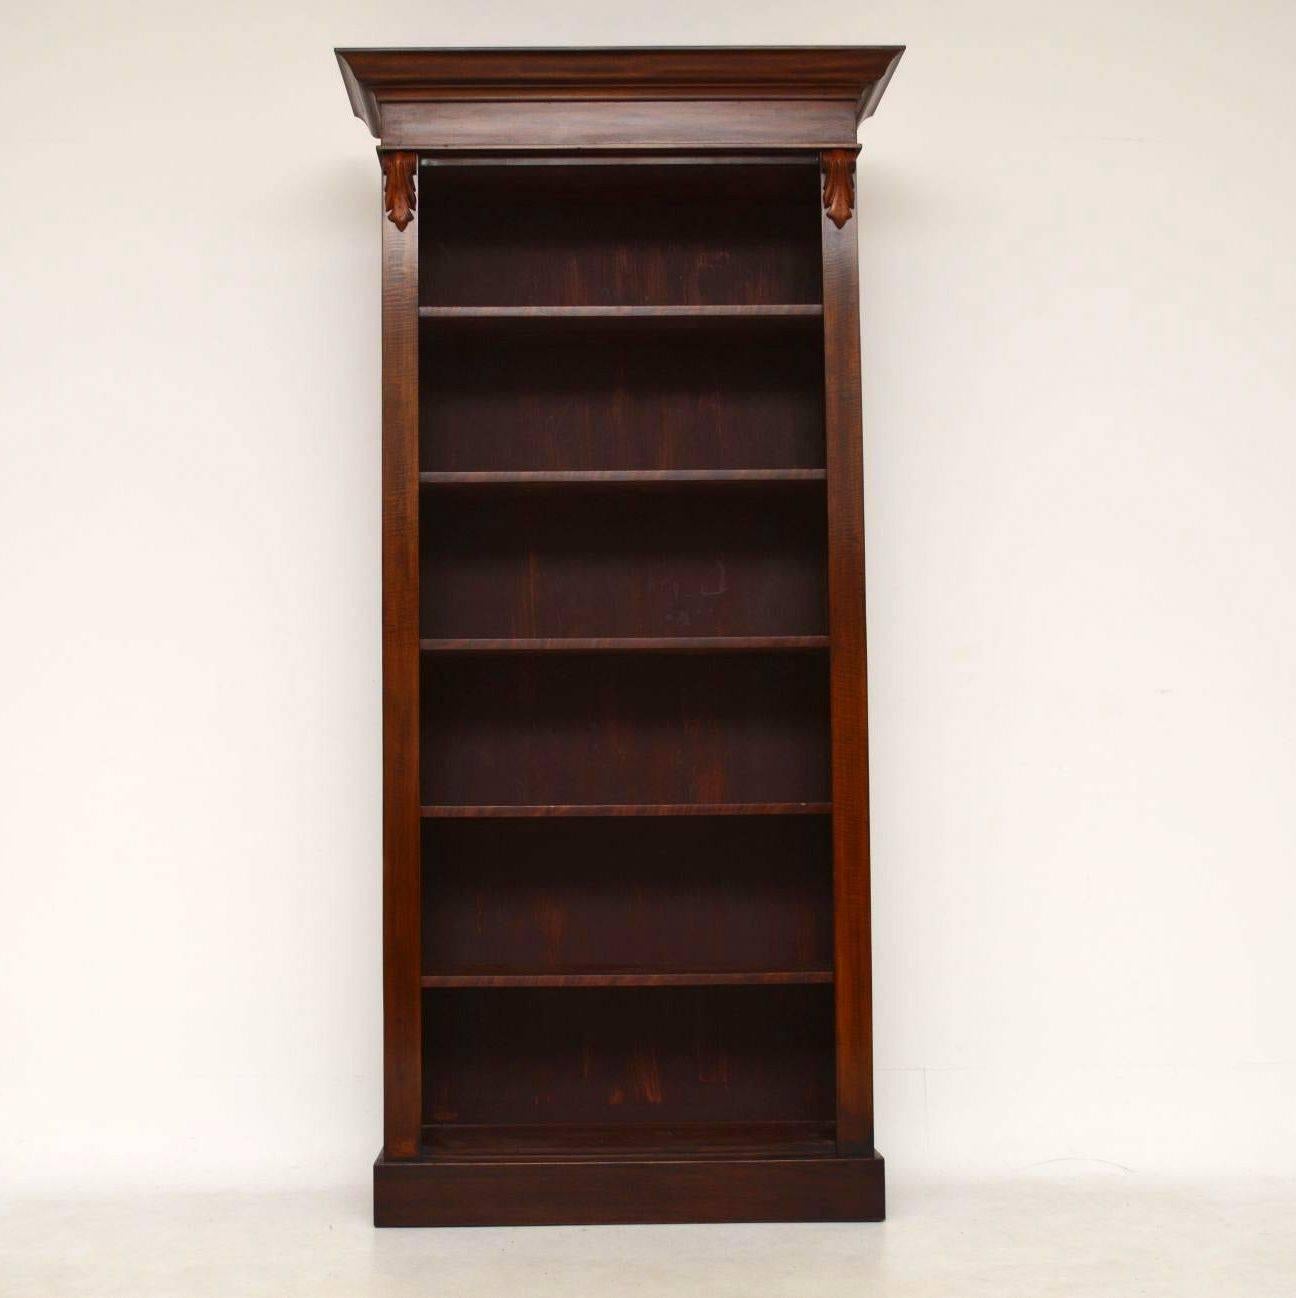 This is a bespoke Victorian style mahogany open bookcase, which has been hand made by a master craftsman. Those of you who are familiar with my web site will recognize this model, because we have had many similar ones in the past in different woods